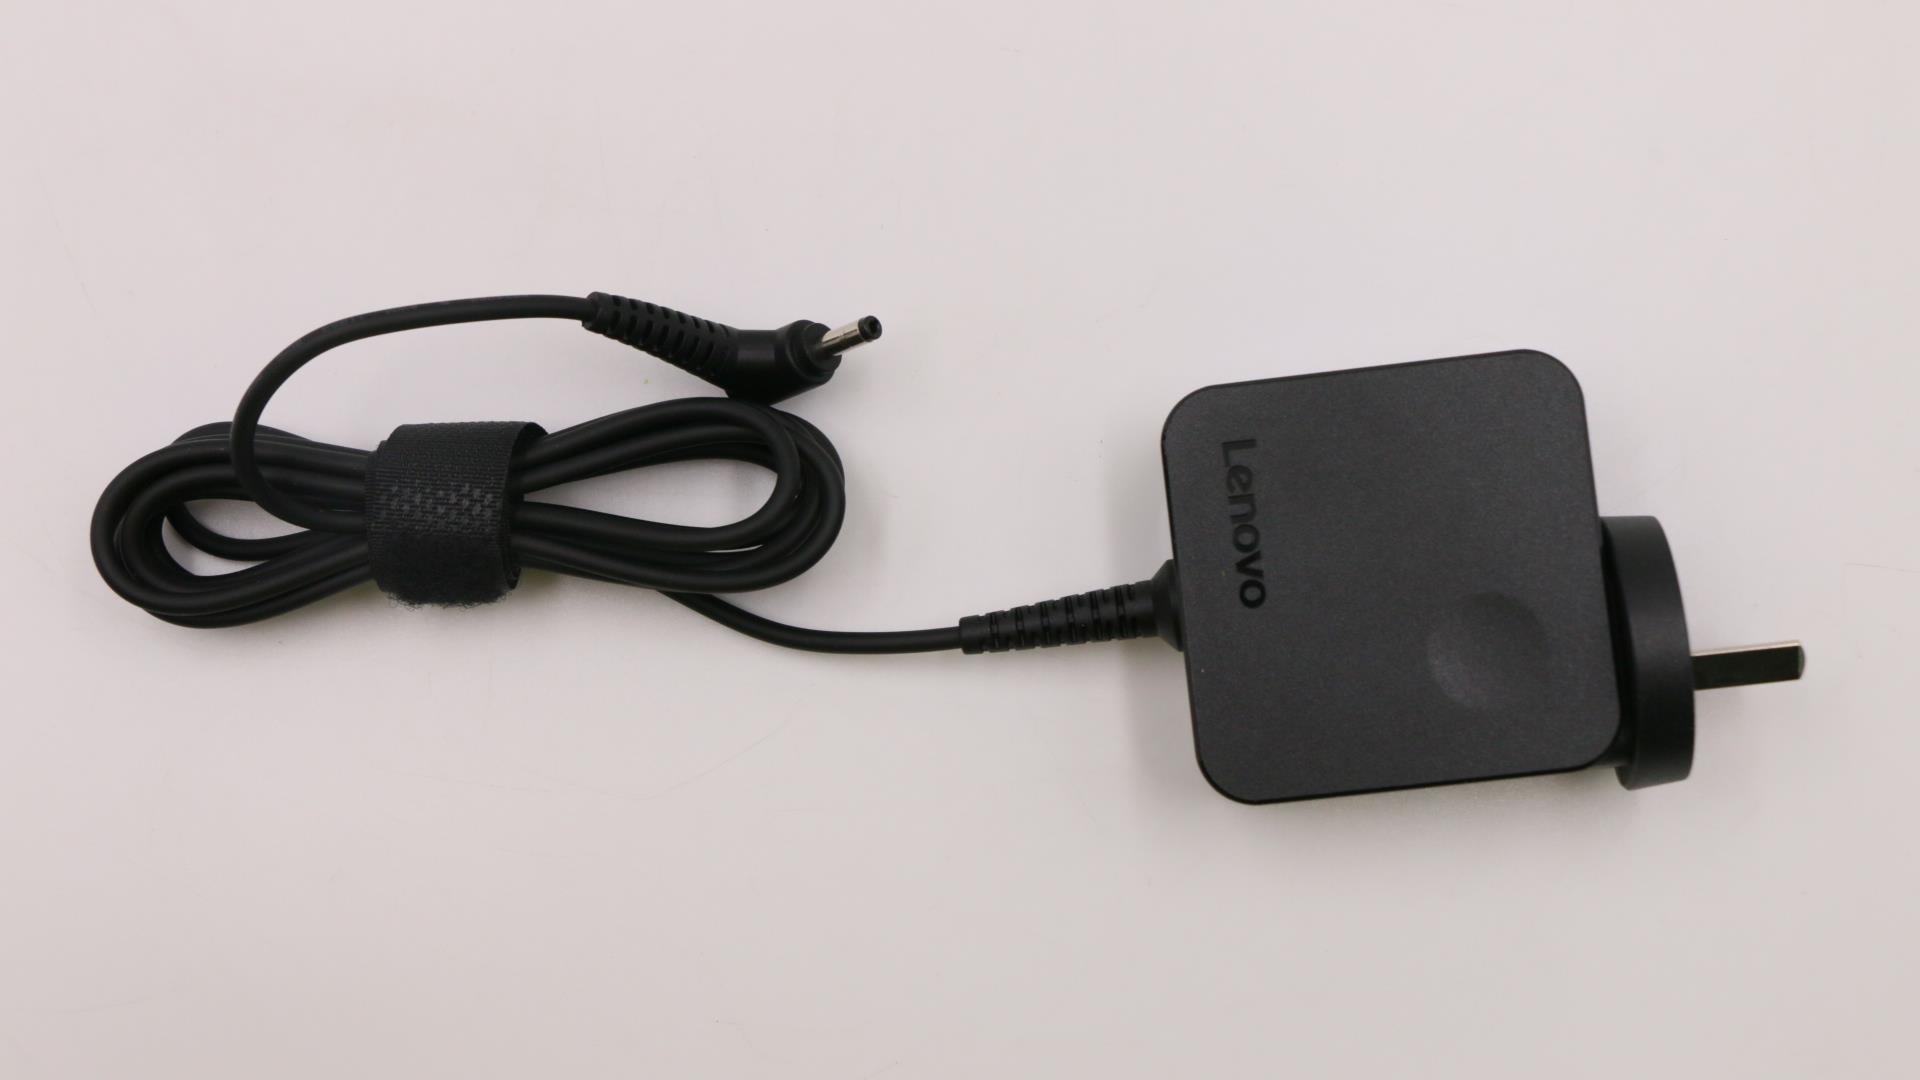 Lenovo Part  Original Lenovo 45W Charger, AC Adapter, Round Connector, 20V, 2.25A, PA-1450-55LG (Includes 0.5m Power Cord)